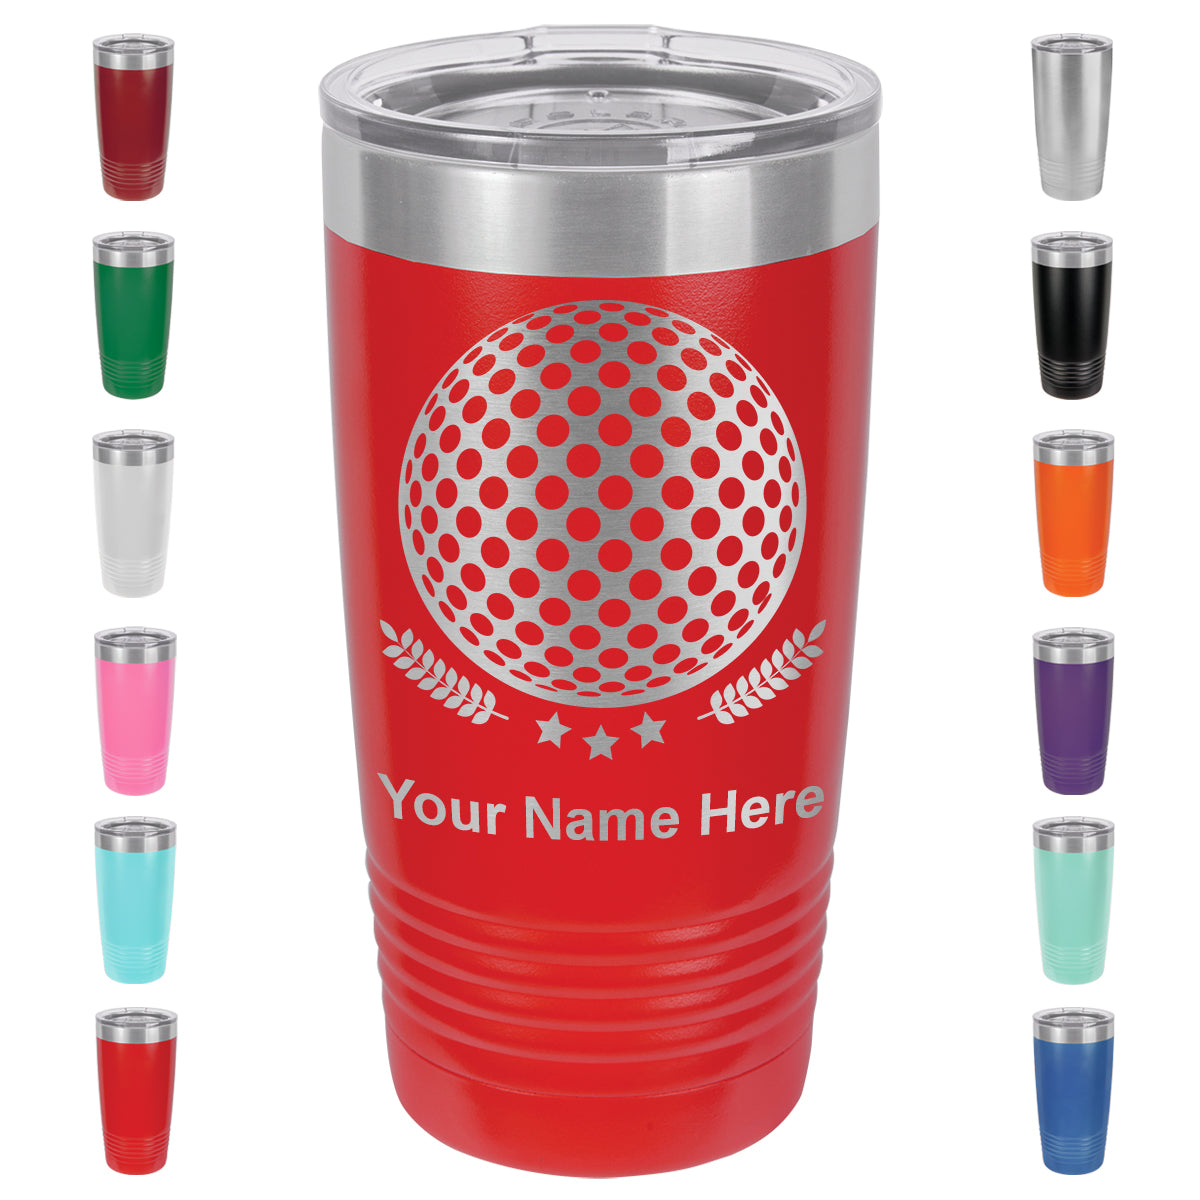 20oz Vacuum Insulated Tumbler Mug, Golf Ball, Personalized Engraving Included